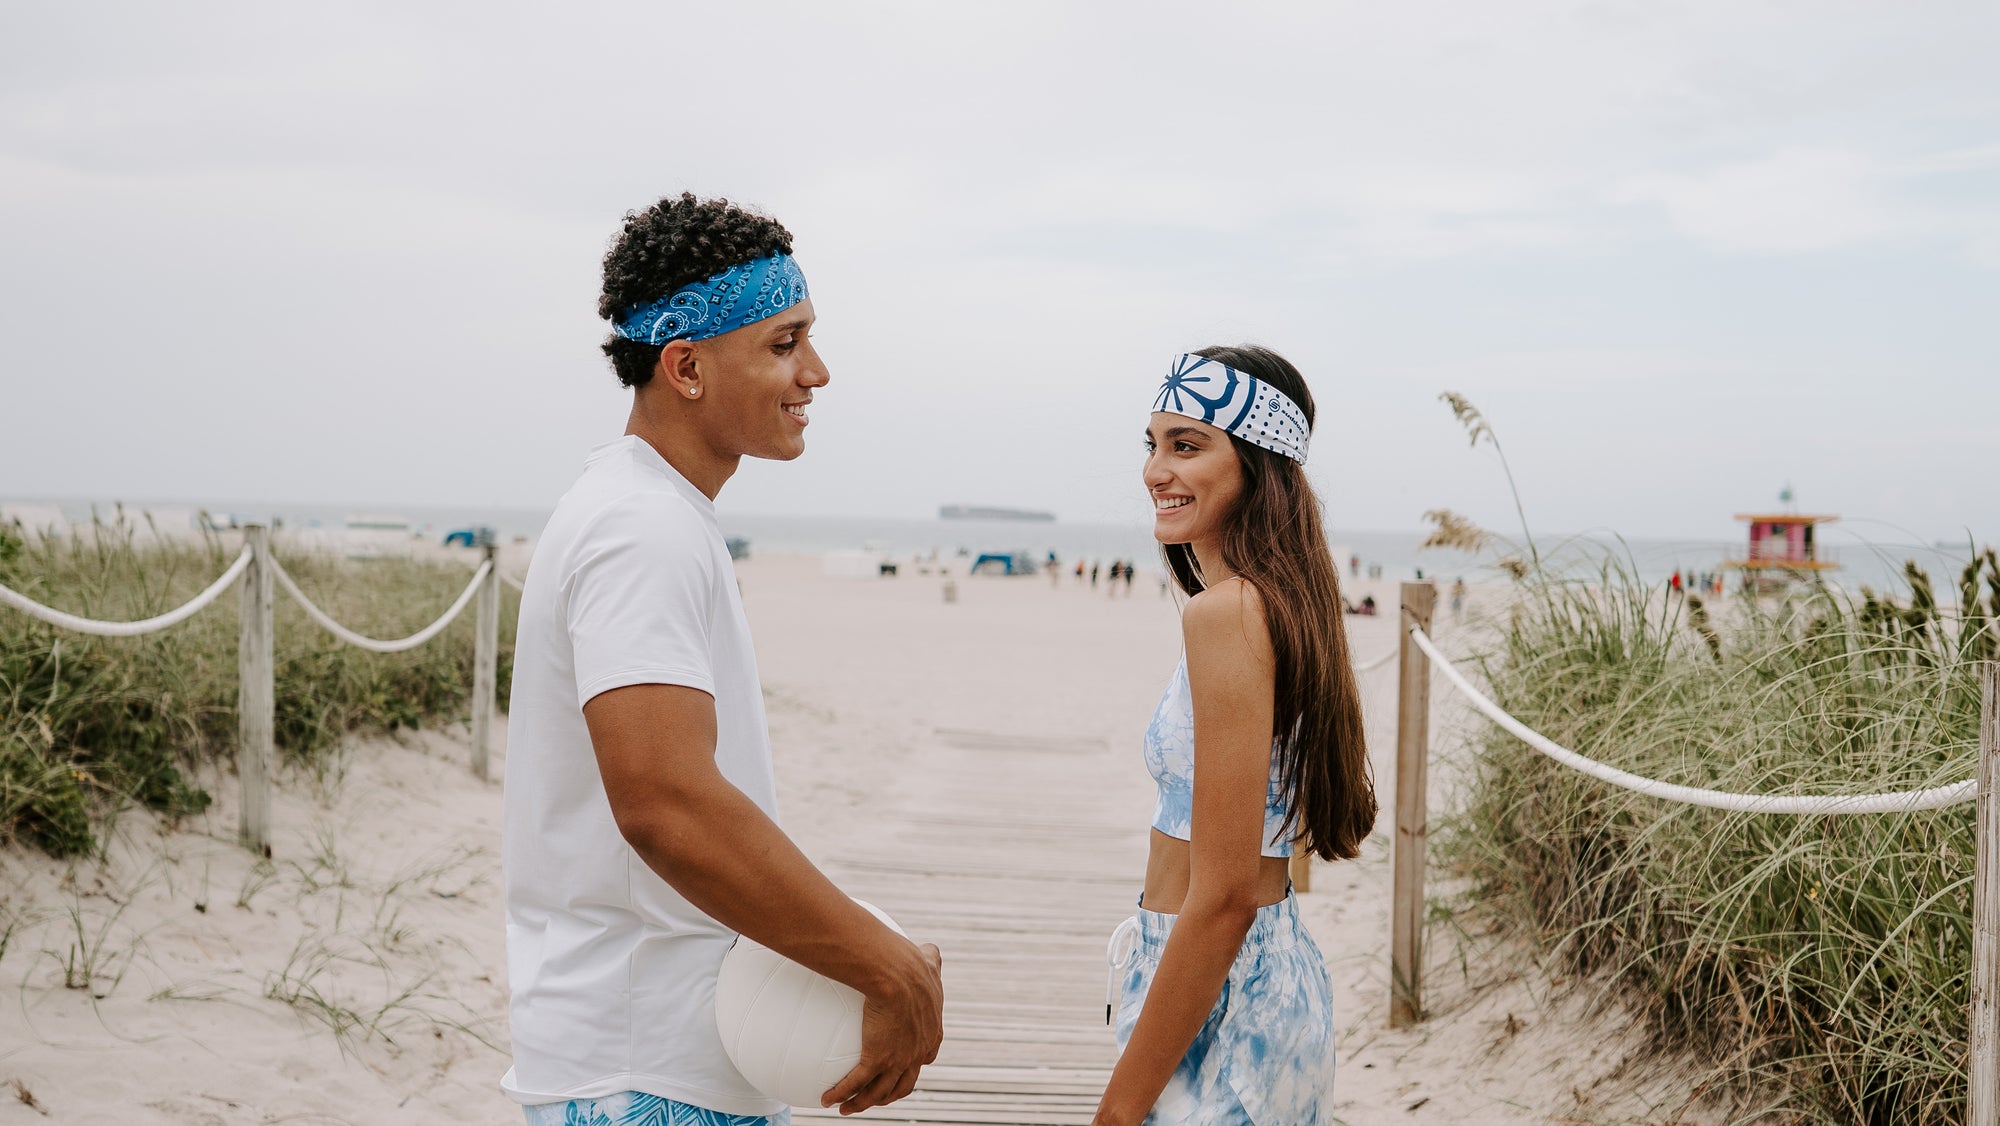 Suddora headbands are great for hot weather and beach days!